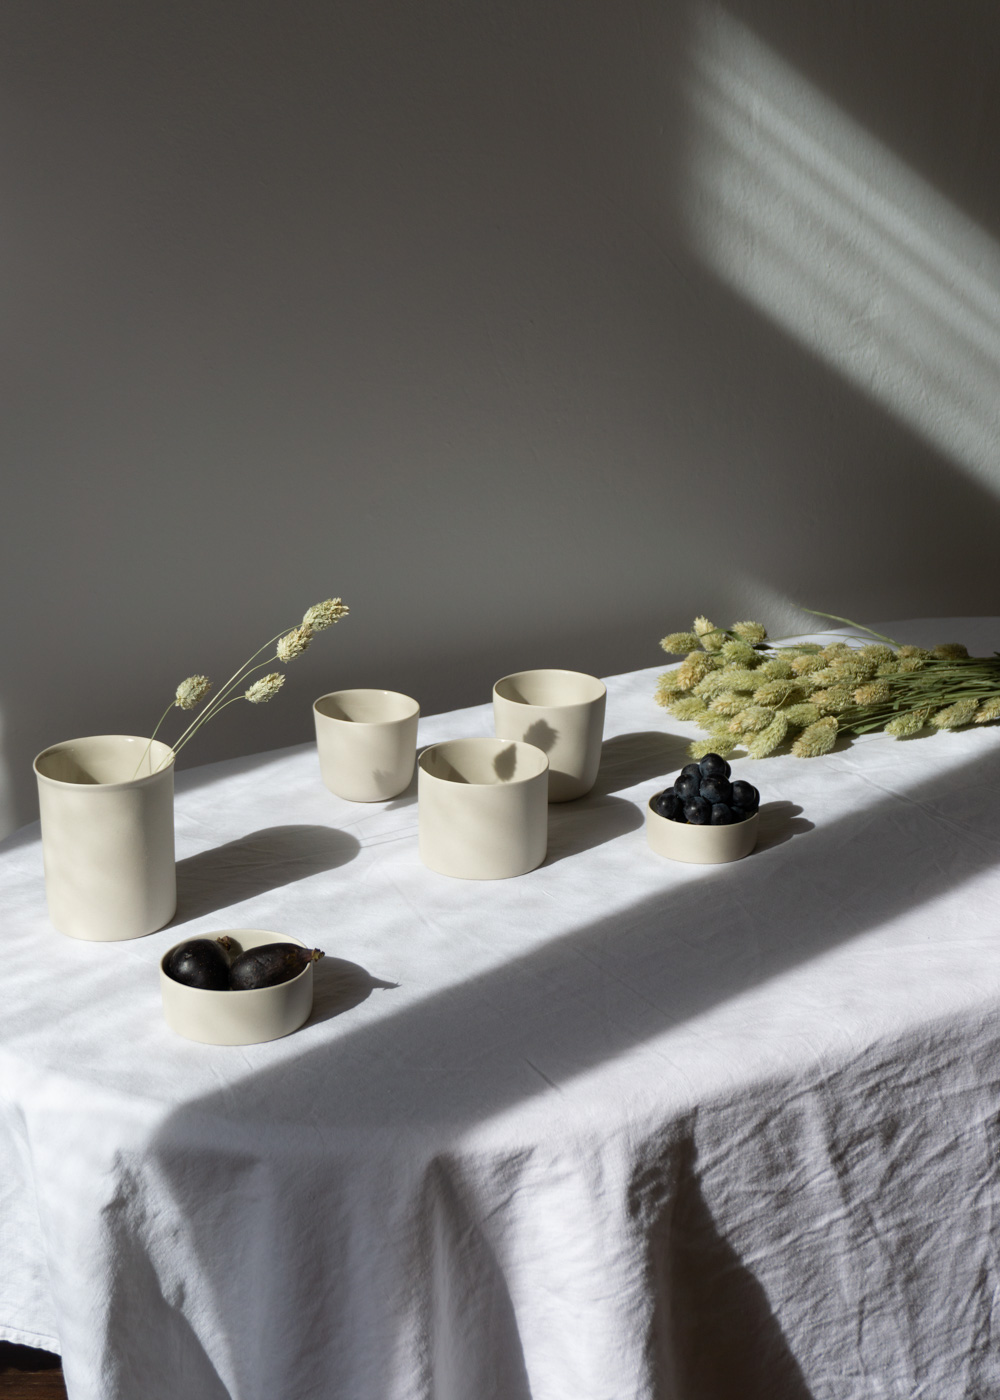 Kleo Co. Ceramics ~ Simple For Everyday Slow Living | Minimalist Tableware, Scandinavian Design, Sustainable Home, Natural Aesthetic | Product Photography, Light and Shadows | RG Daily Blog